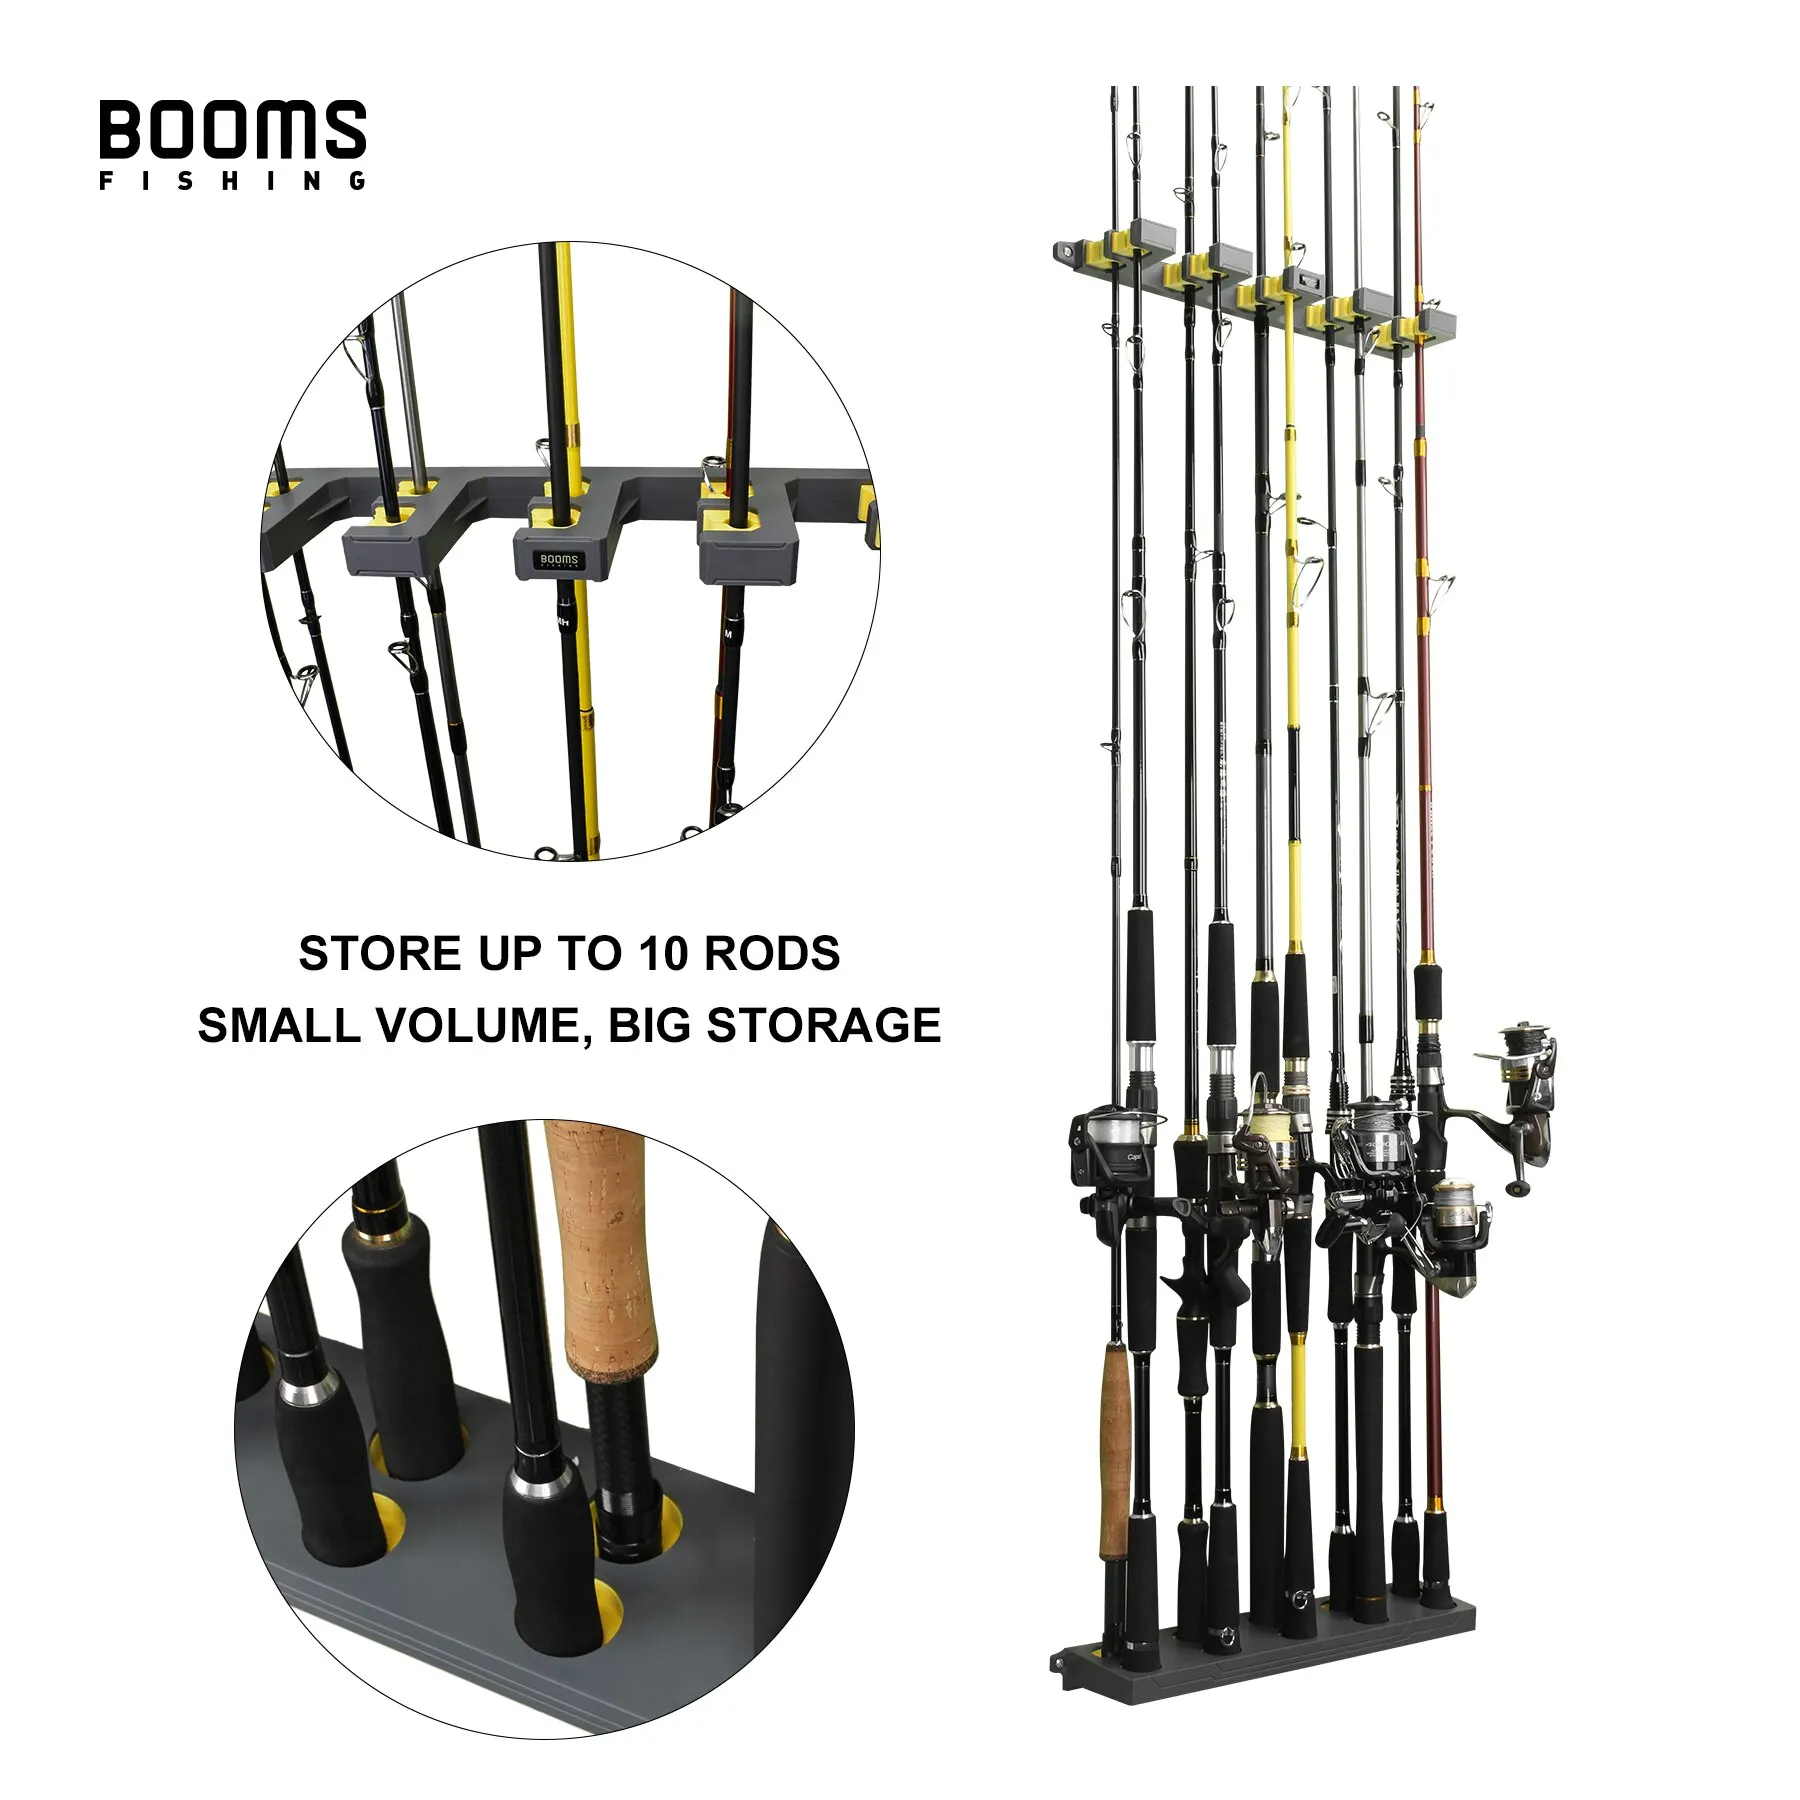 https://ae01.alicdn.com/kf/S81d86d1223d54a2c96f4c21f8561d569h/Booms-Fishing-WV4-Rod-Holder-Up-to-10-Rods-Vertical-and-Horizontal-on-Wall-Protect-Storage.jpg